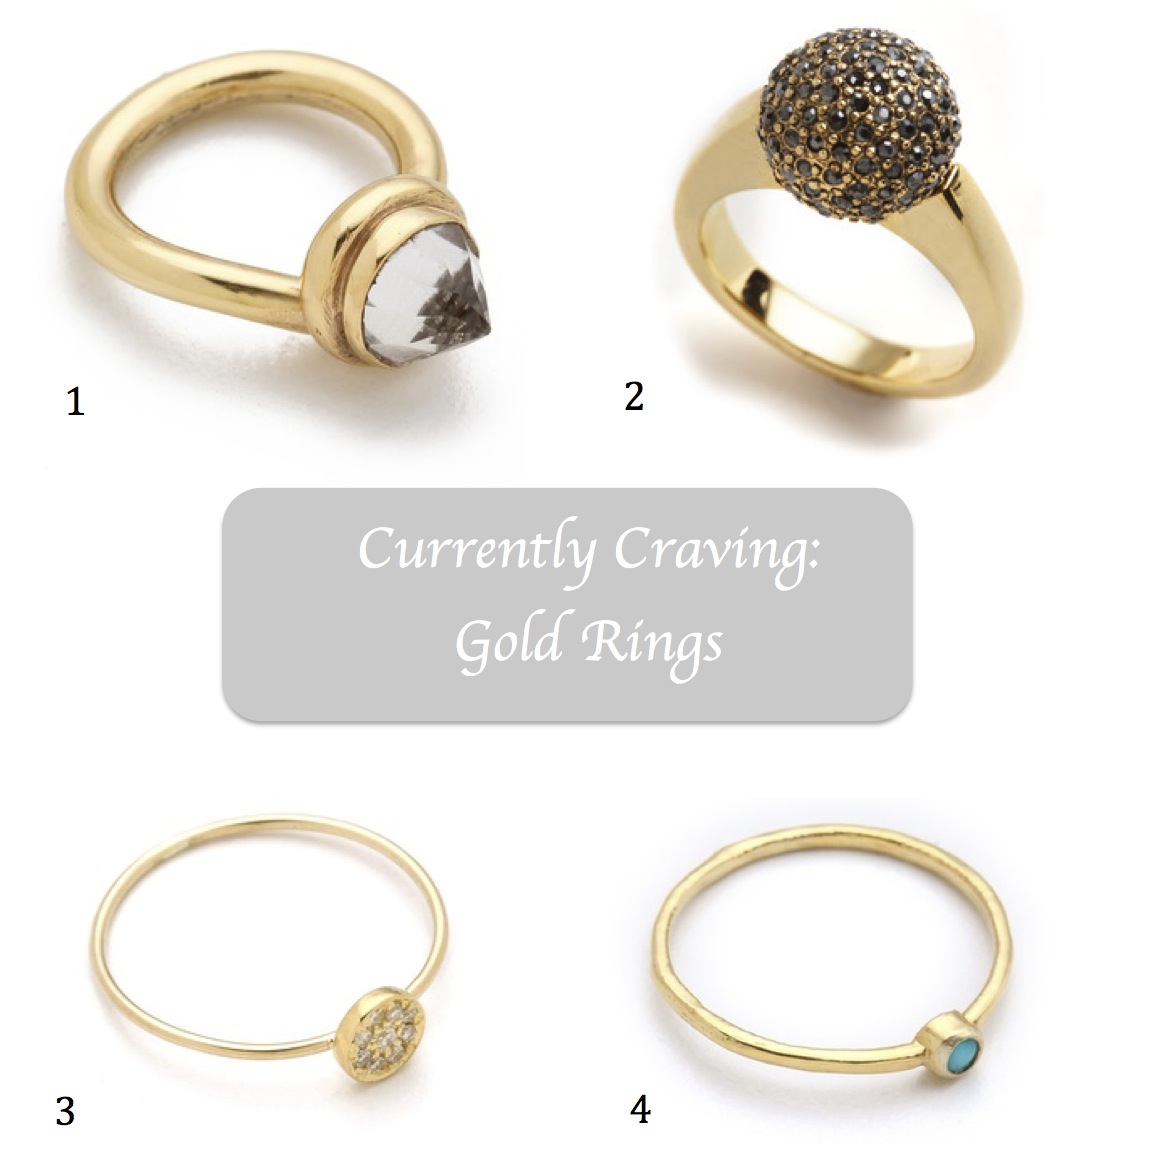 Currently Craving: Gold Rings